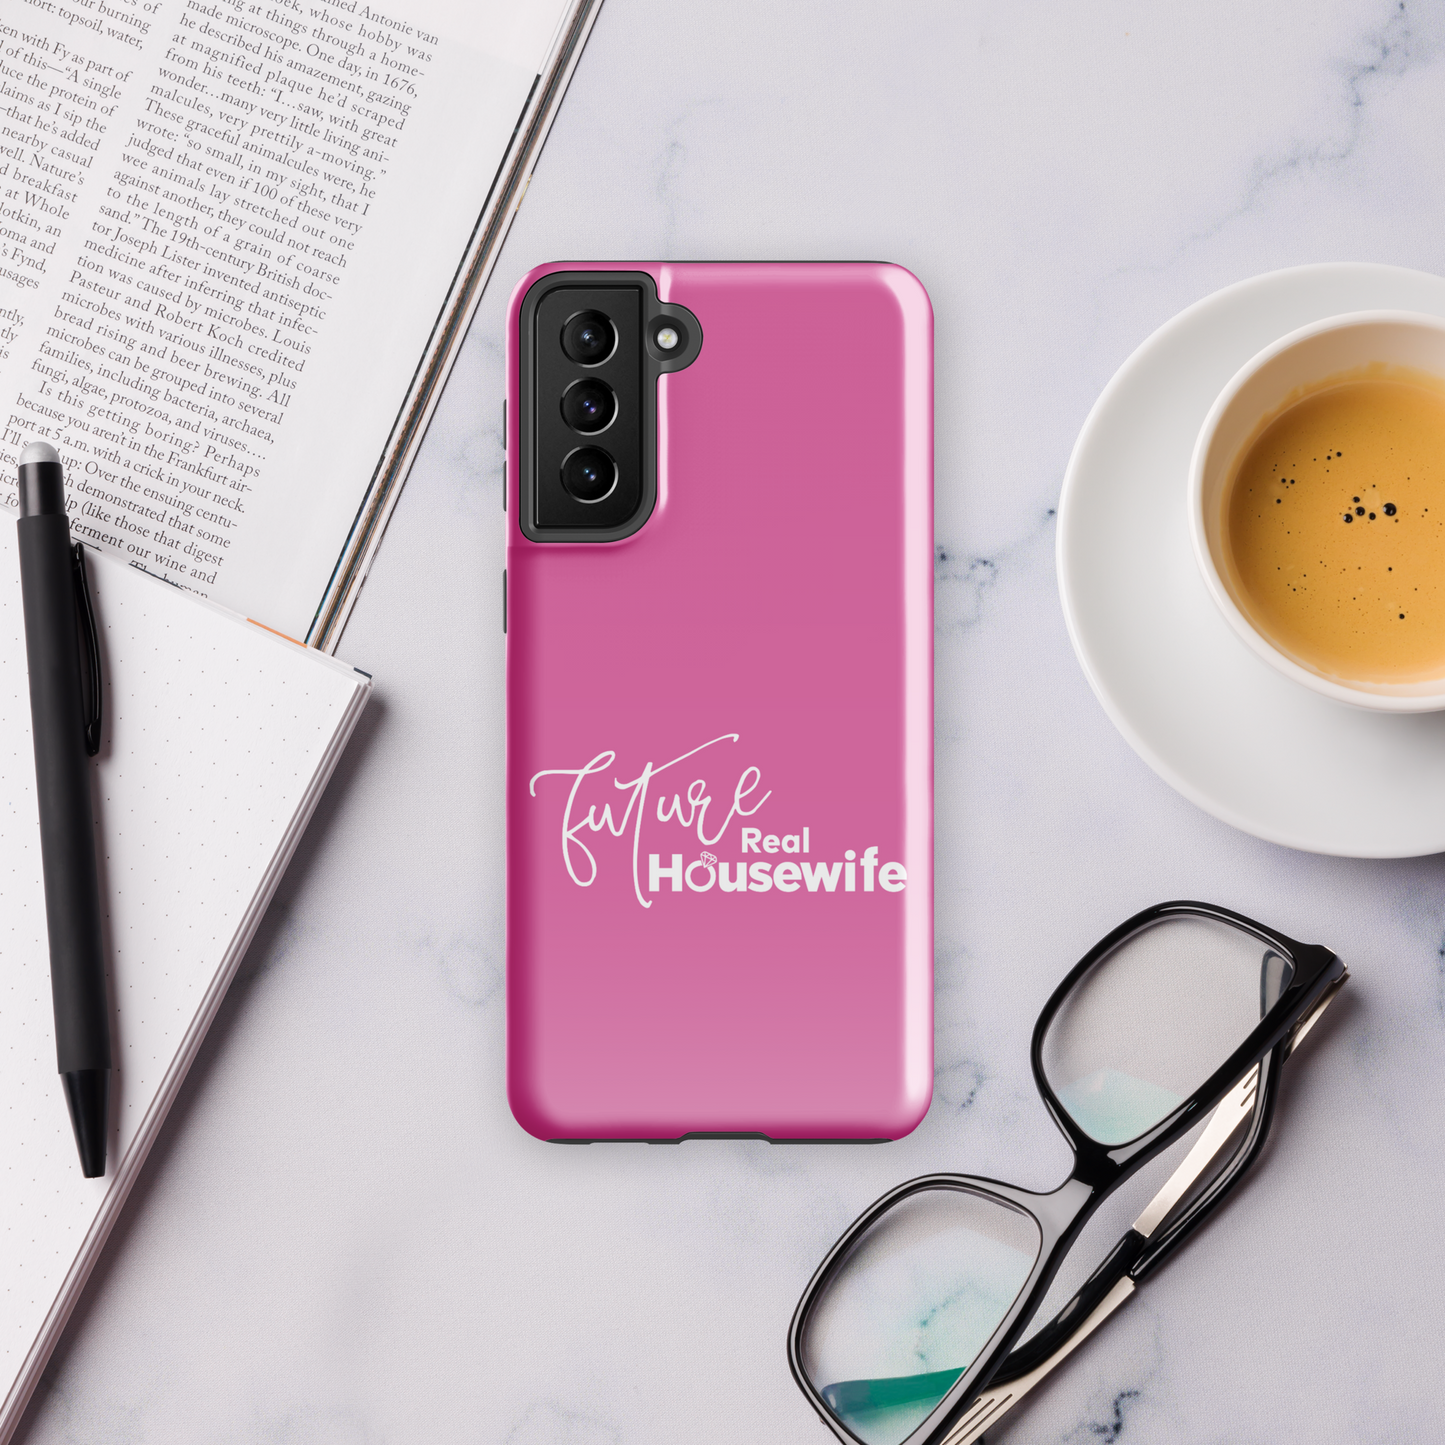 Bravo Gear Future Real Housewife Tough Phone Case - Samsung